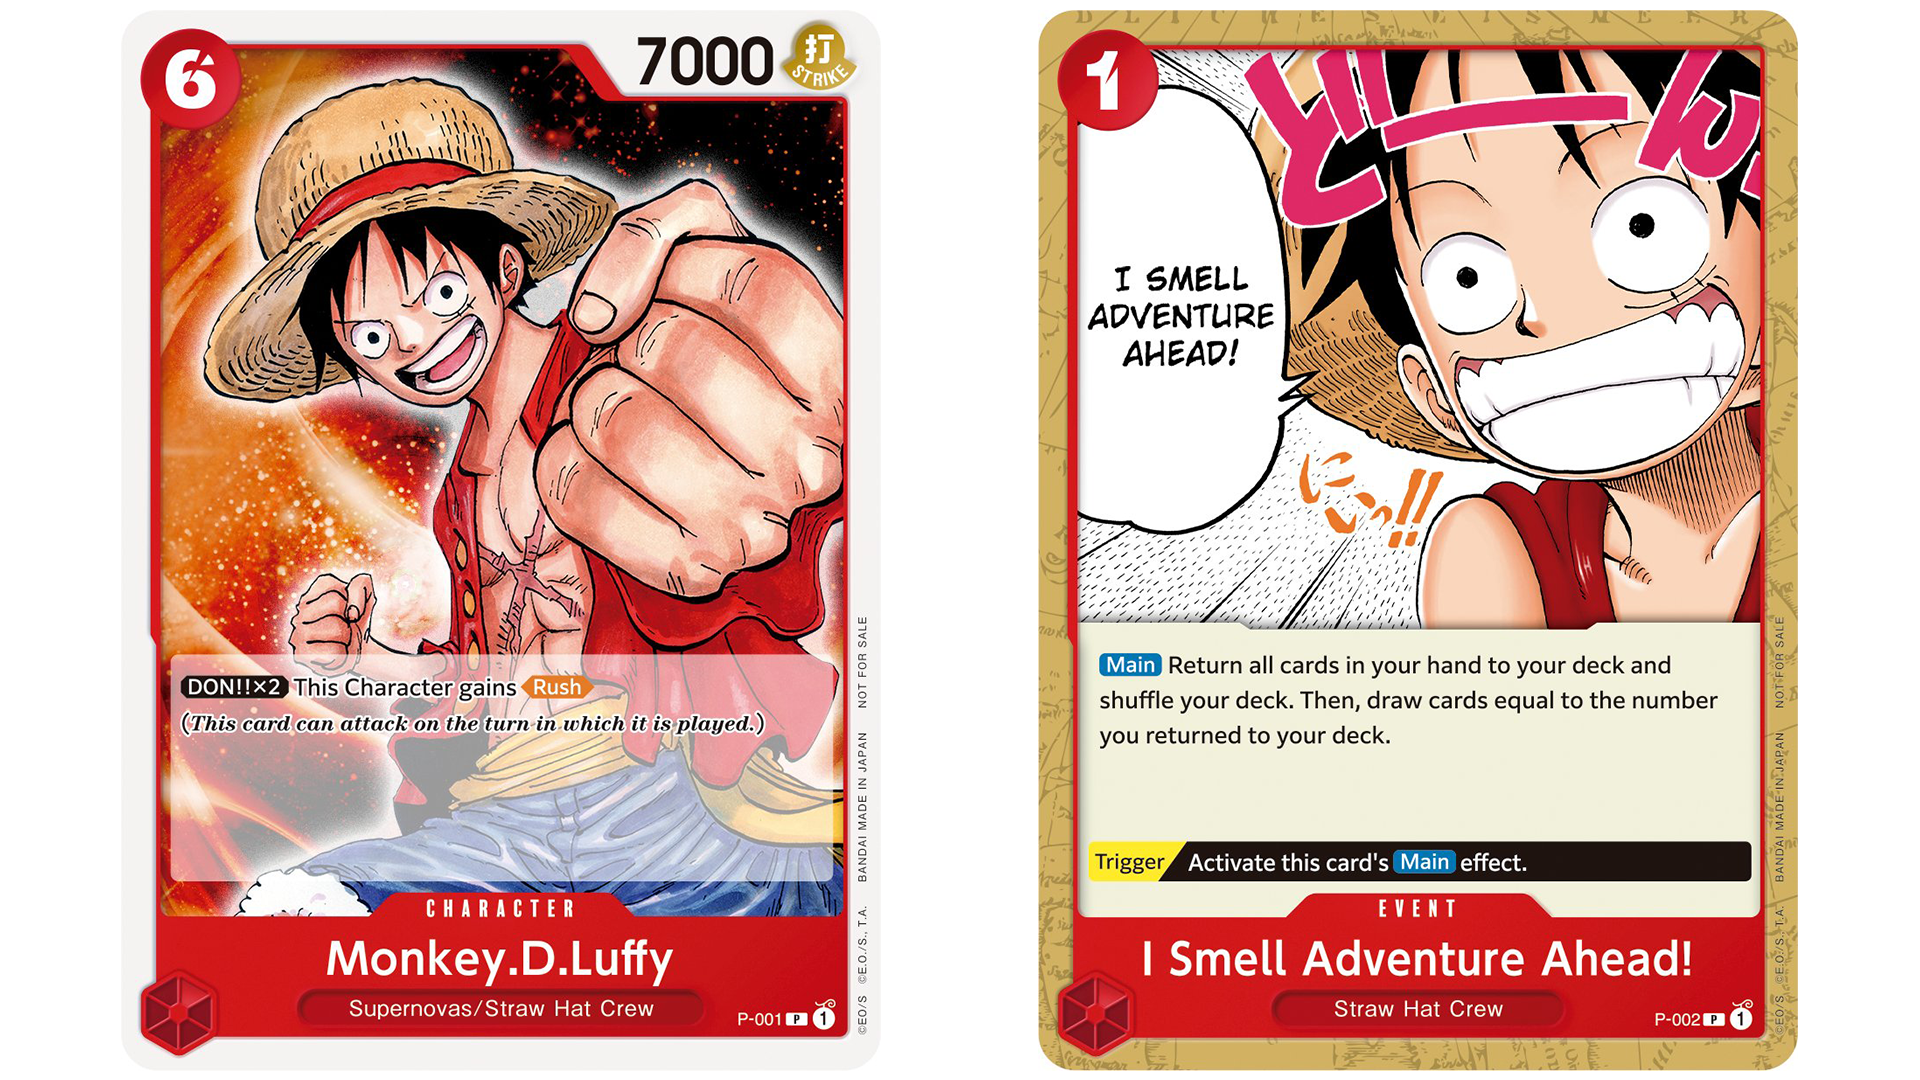 SALE人気セールONEPIECE CARD GAME その他